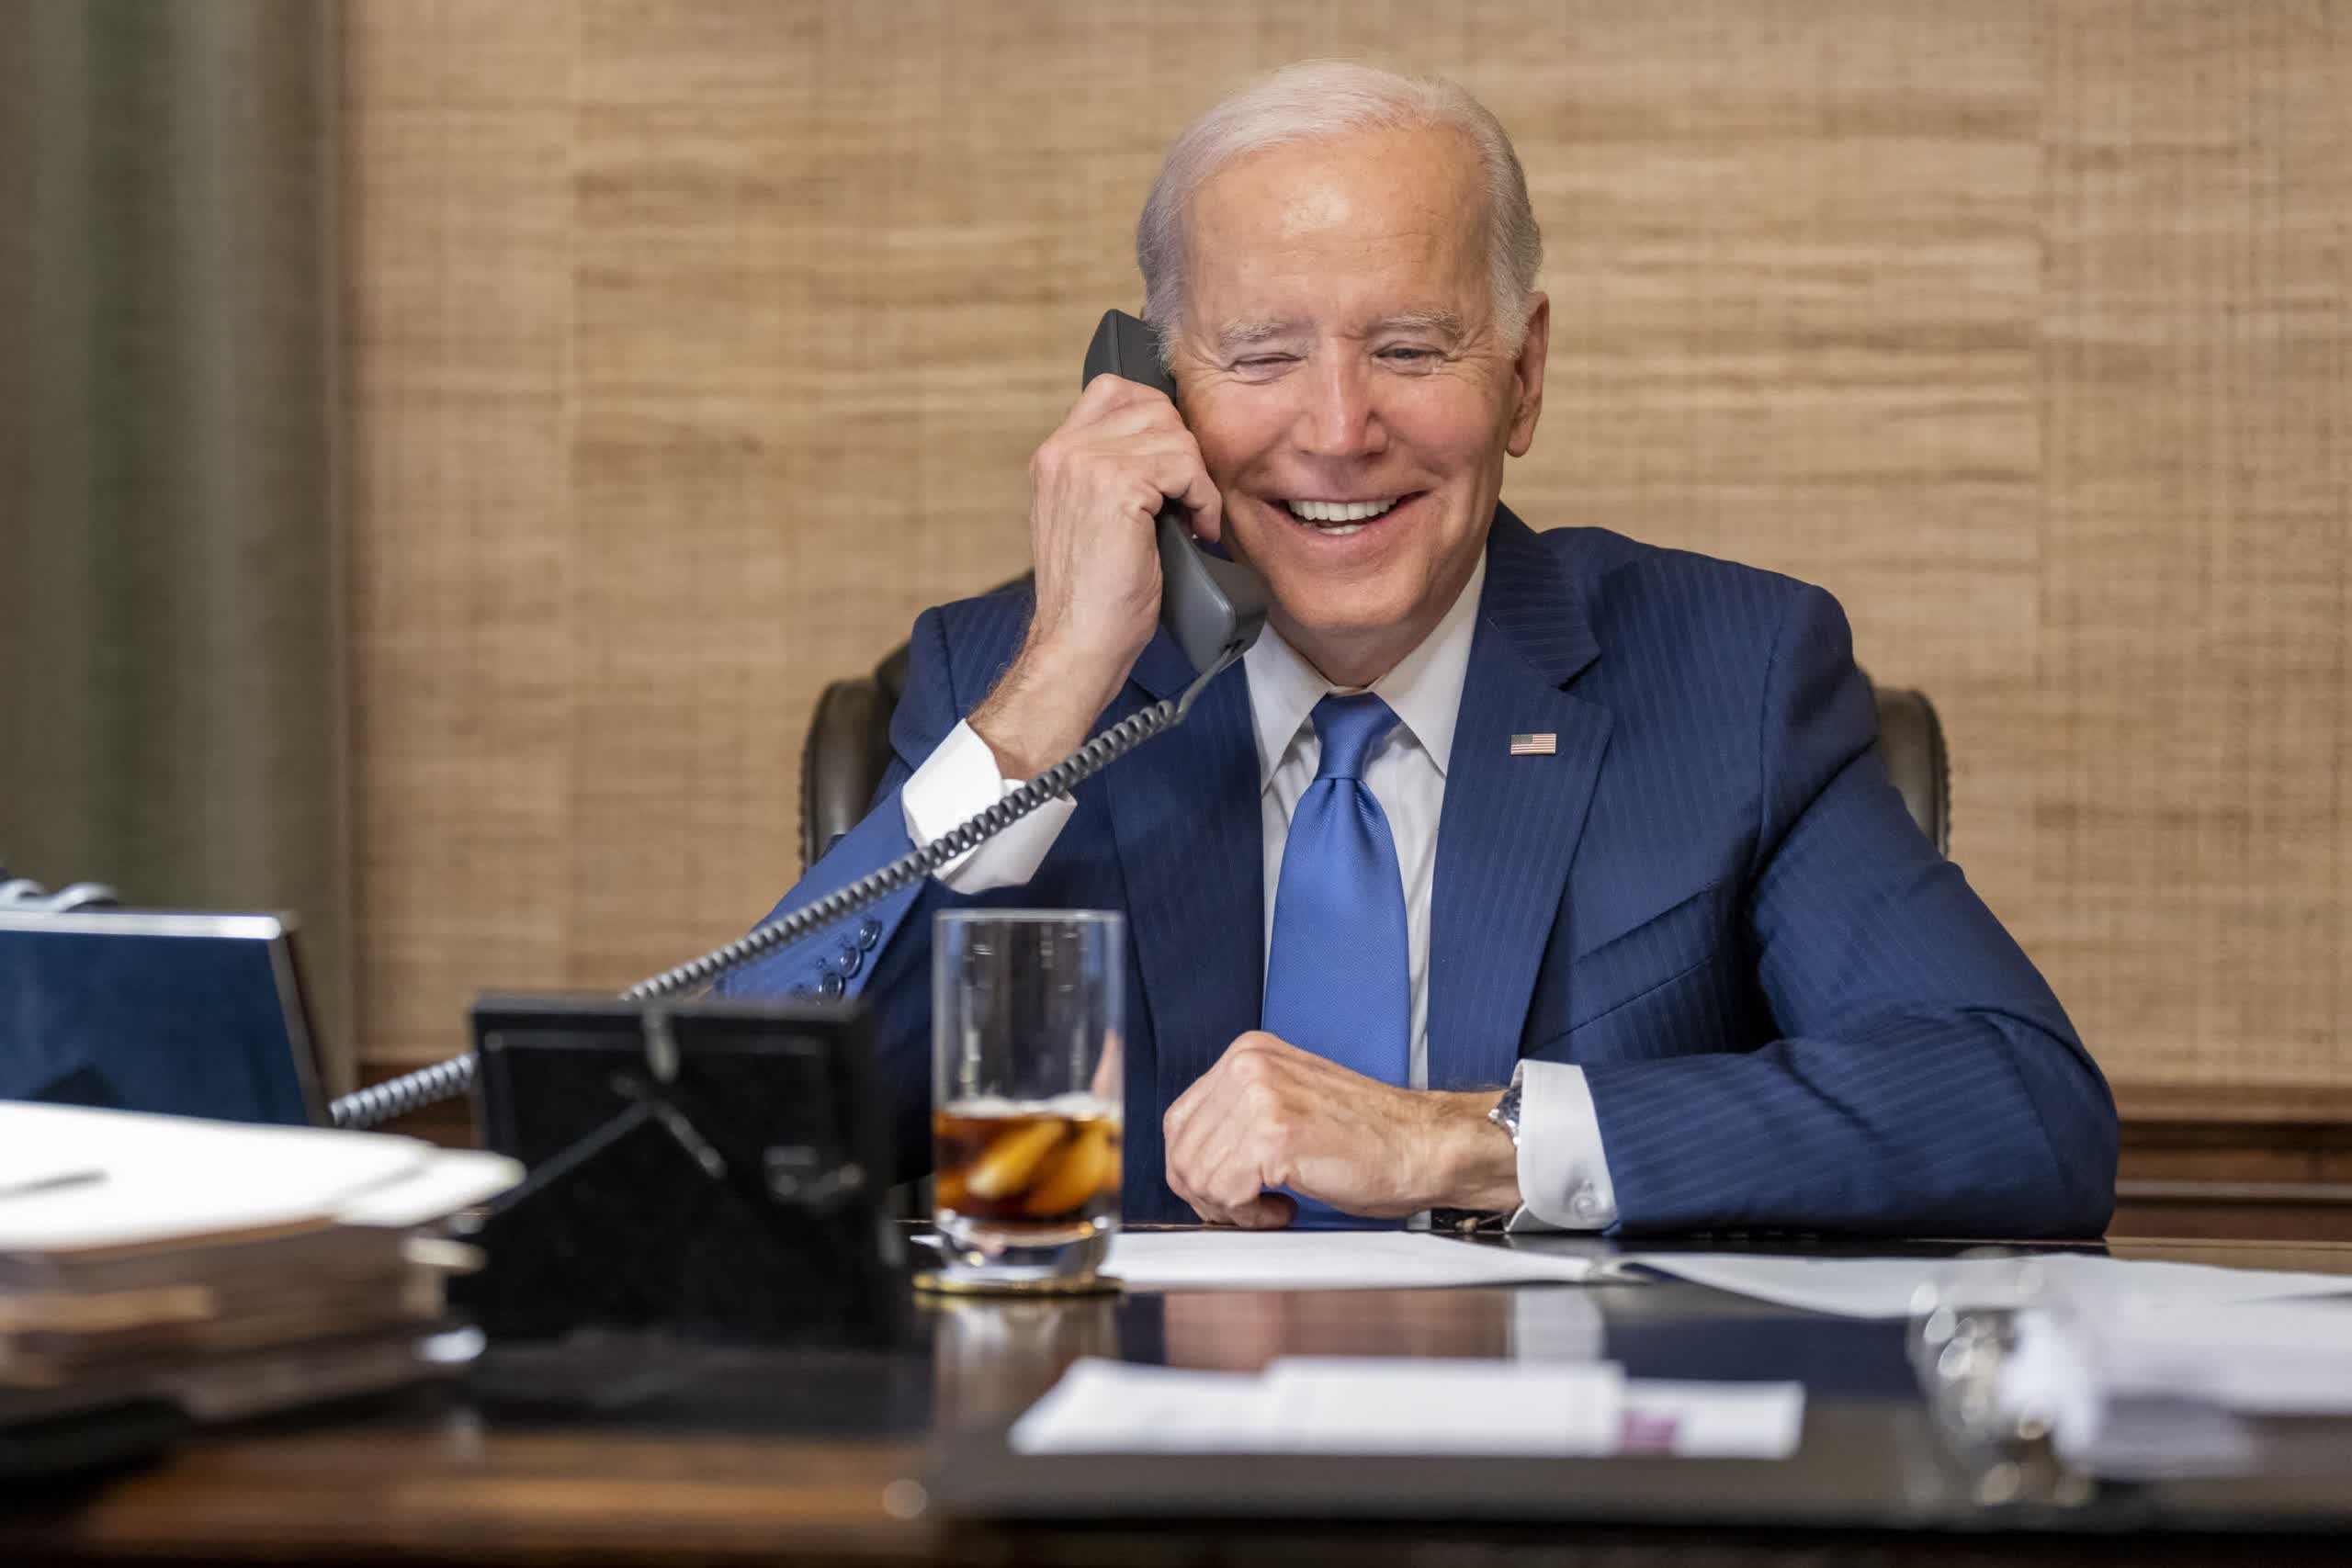 ElevenLabs, whose tech was used for the fake Biden robocalls, partners with AI detection company